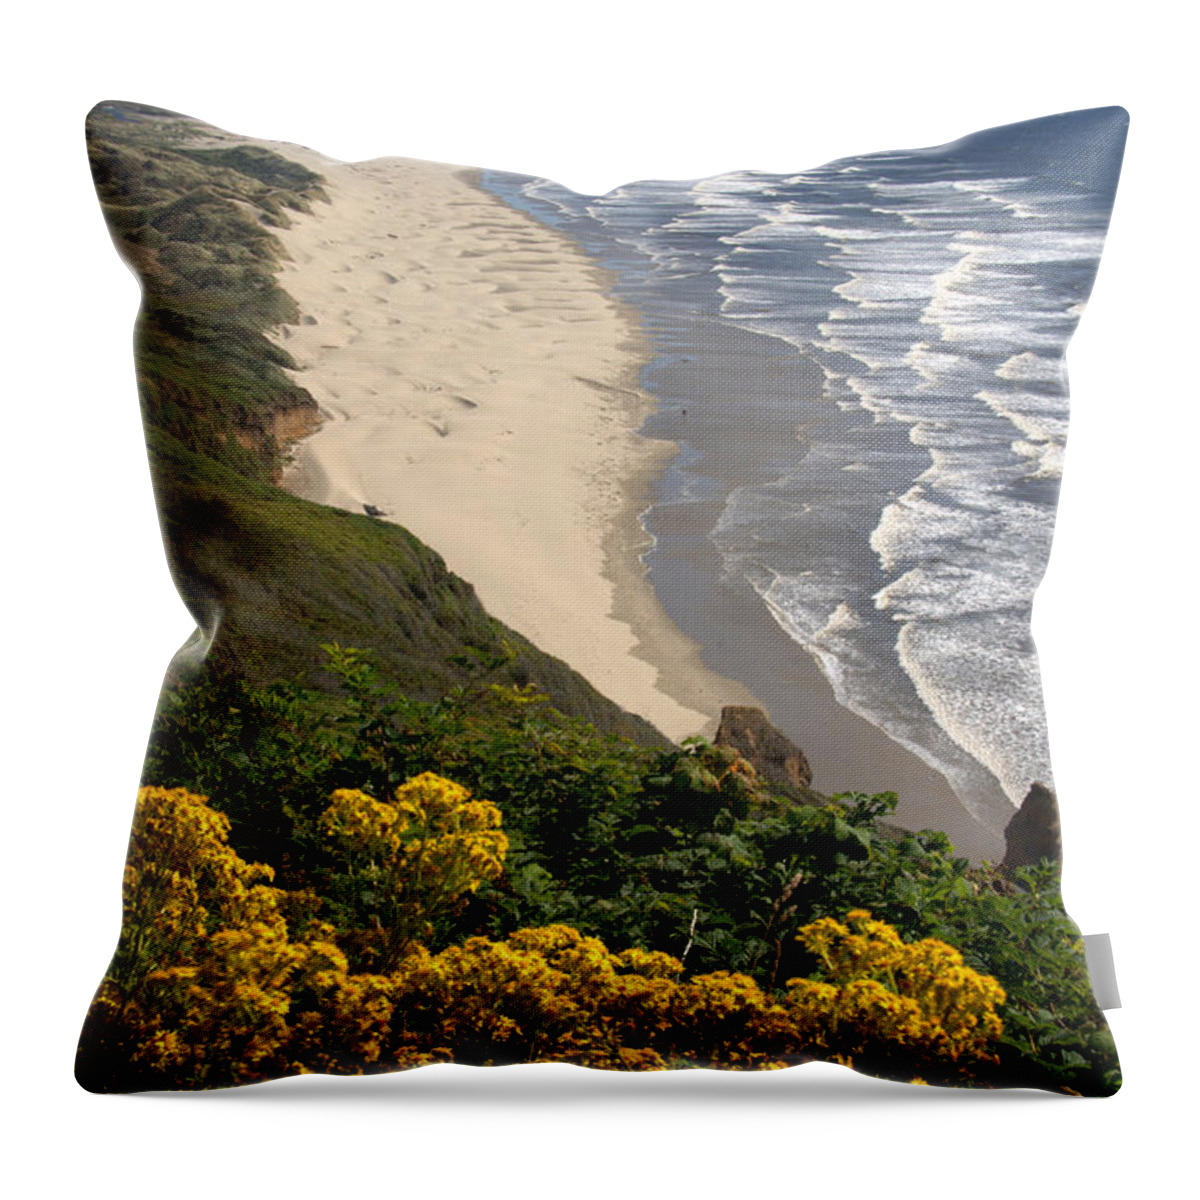 Heceta Beach Throw Pillow featuring the photograph Heceta Beach View by Mick Anderson